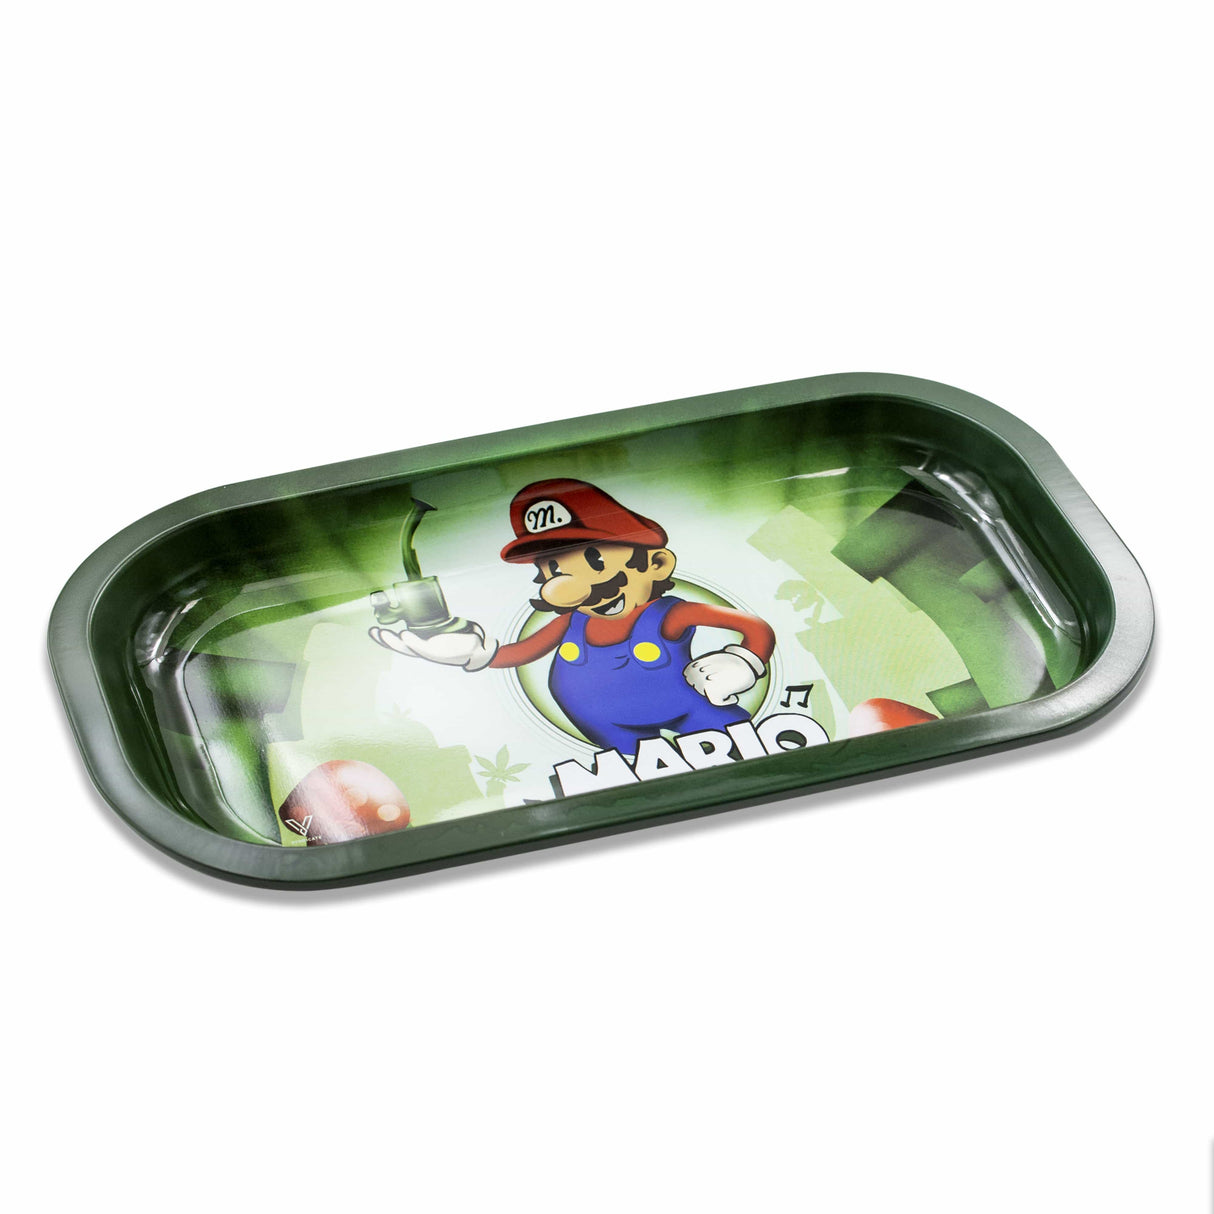 V Syndicate Mario Smoke Sesh Metal Rollin' Tray with vibrant green design, top view